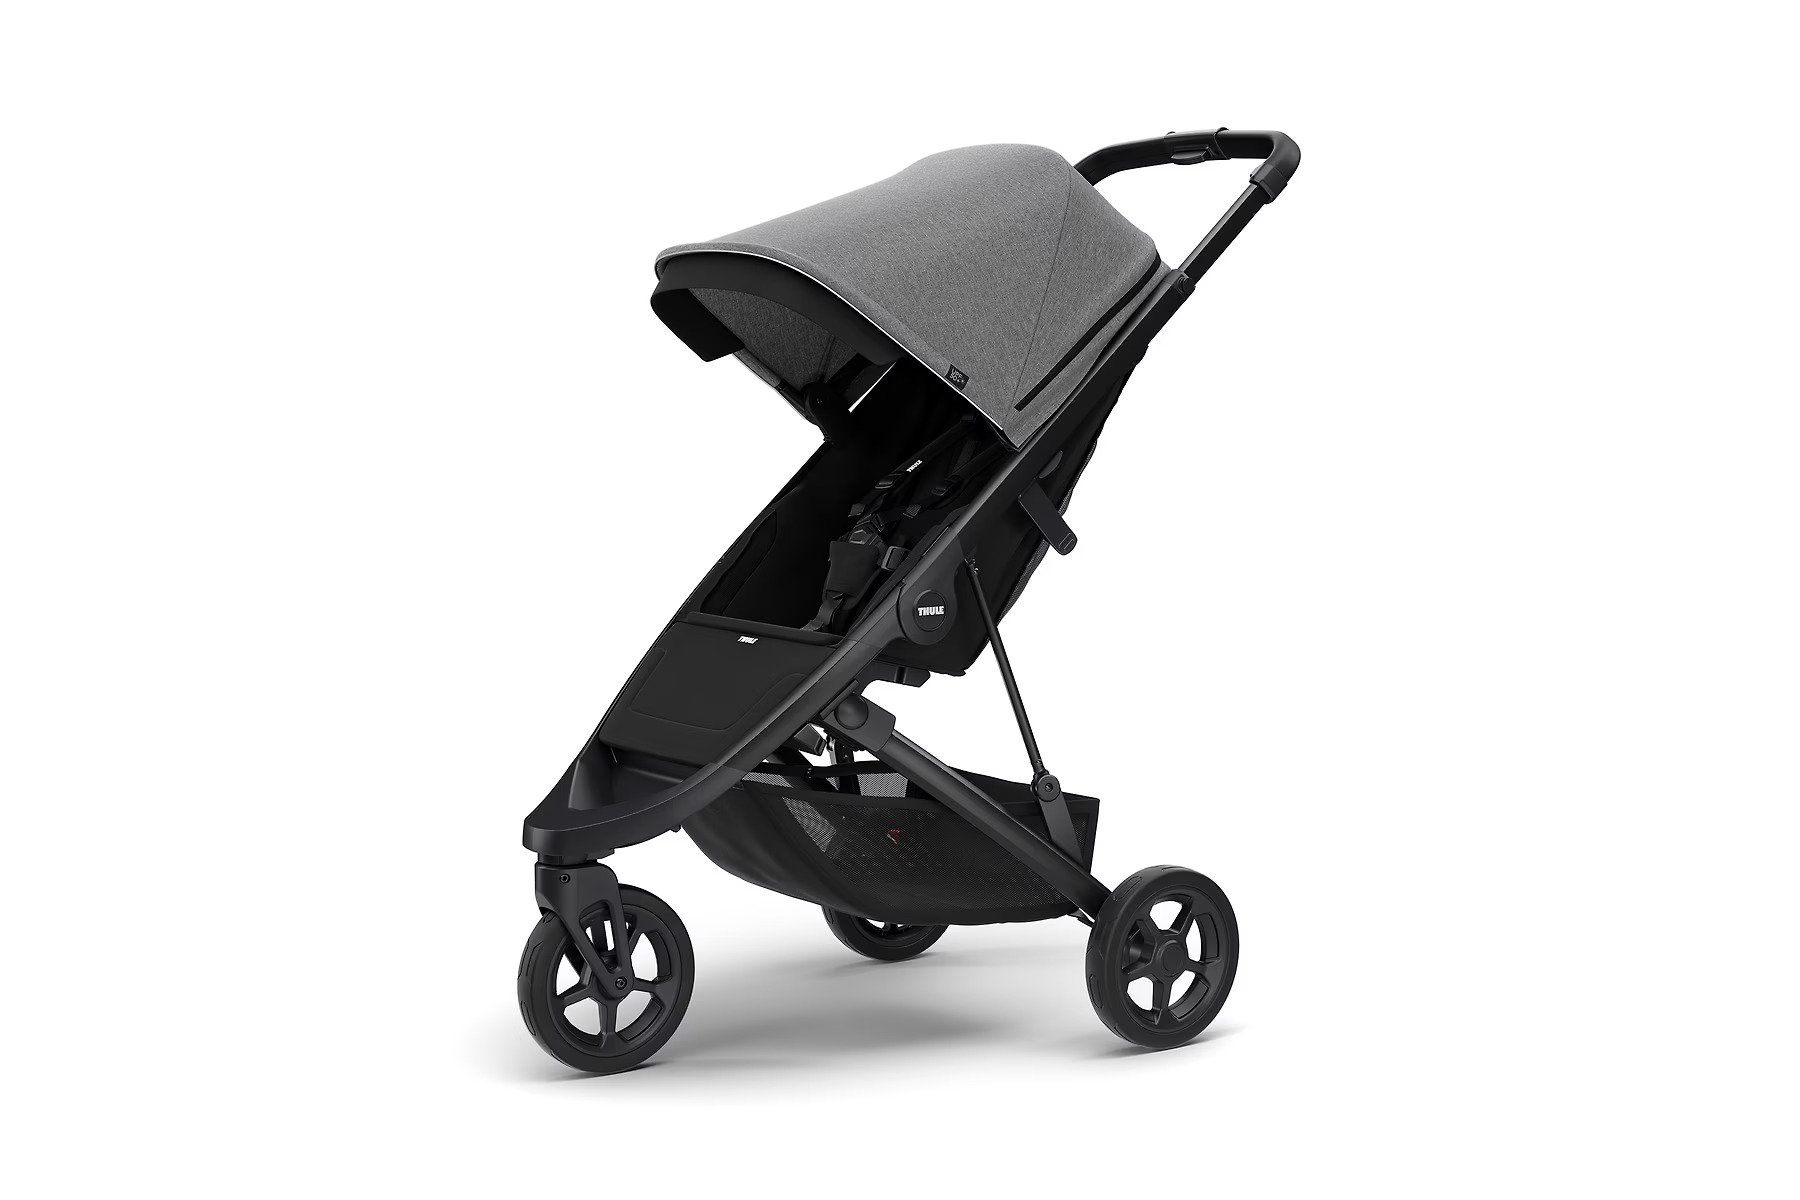 These Are the Best Baby Strollers - Check the List